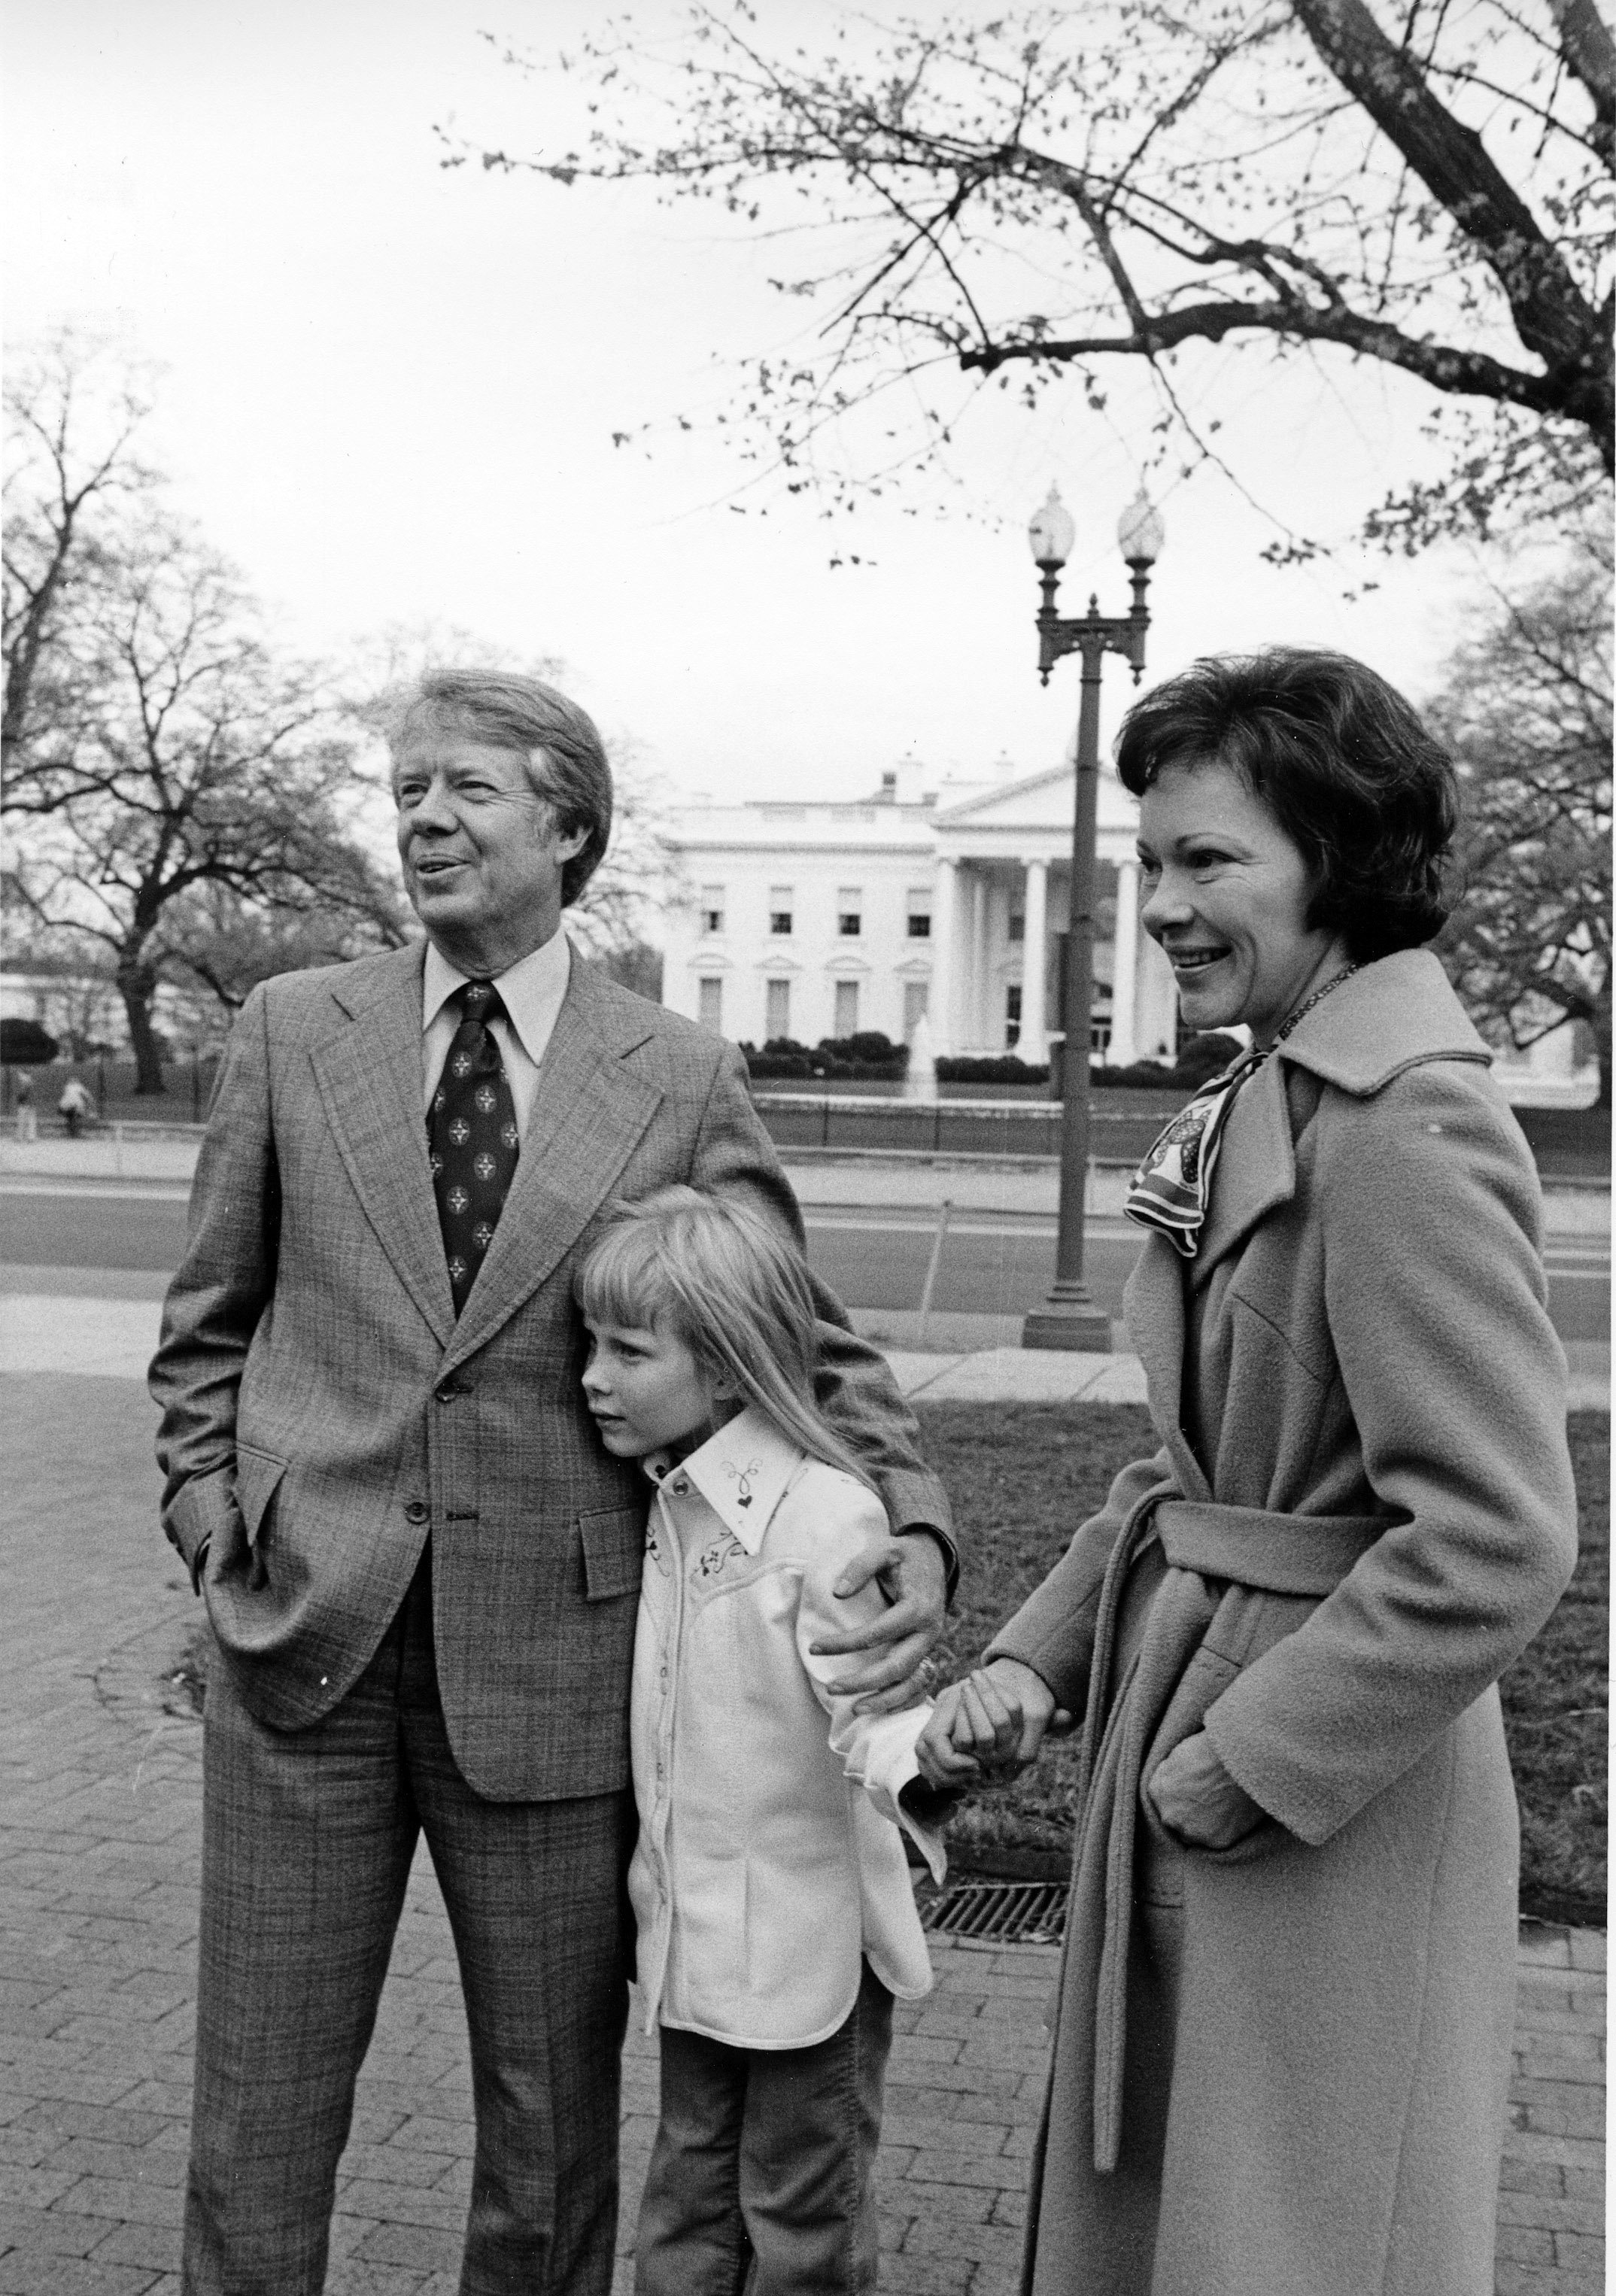 Jimmy Carter:
                              Rosalynn and Jimmy had four children, but their three eldest, all boys, were on their own by the time the Carters moved into the White House in 1977. It was their daughter Amy, 9 years old when her father was inaugurated, who captured America's attention. Since leaving the White House, she has worked as an artist and activist.